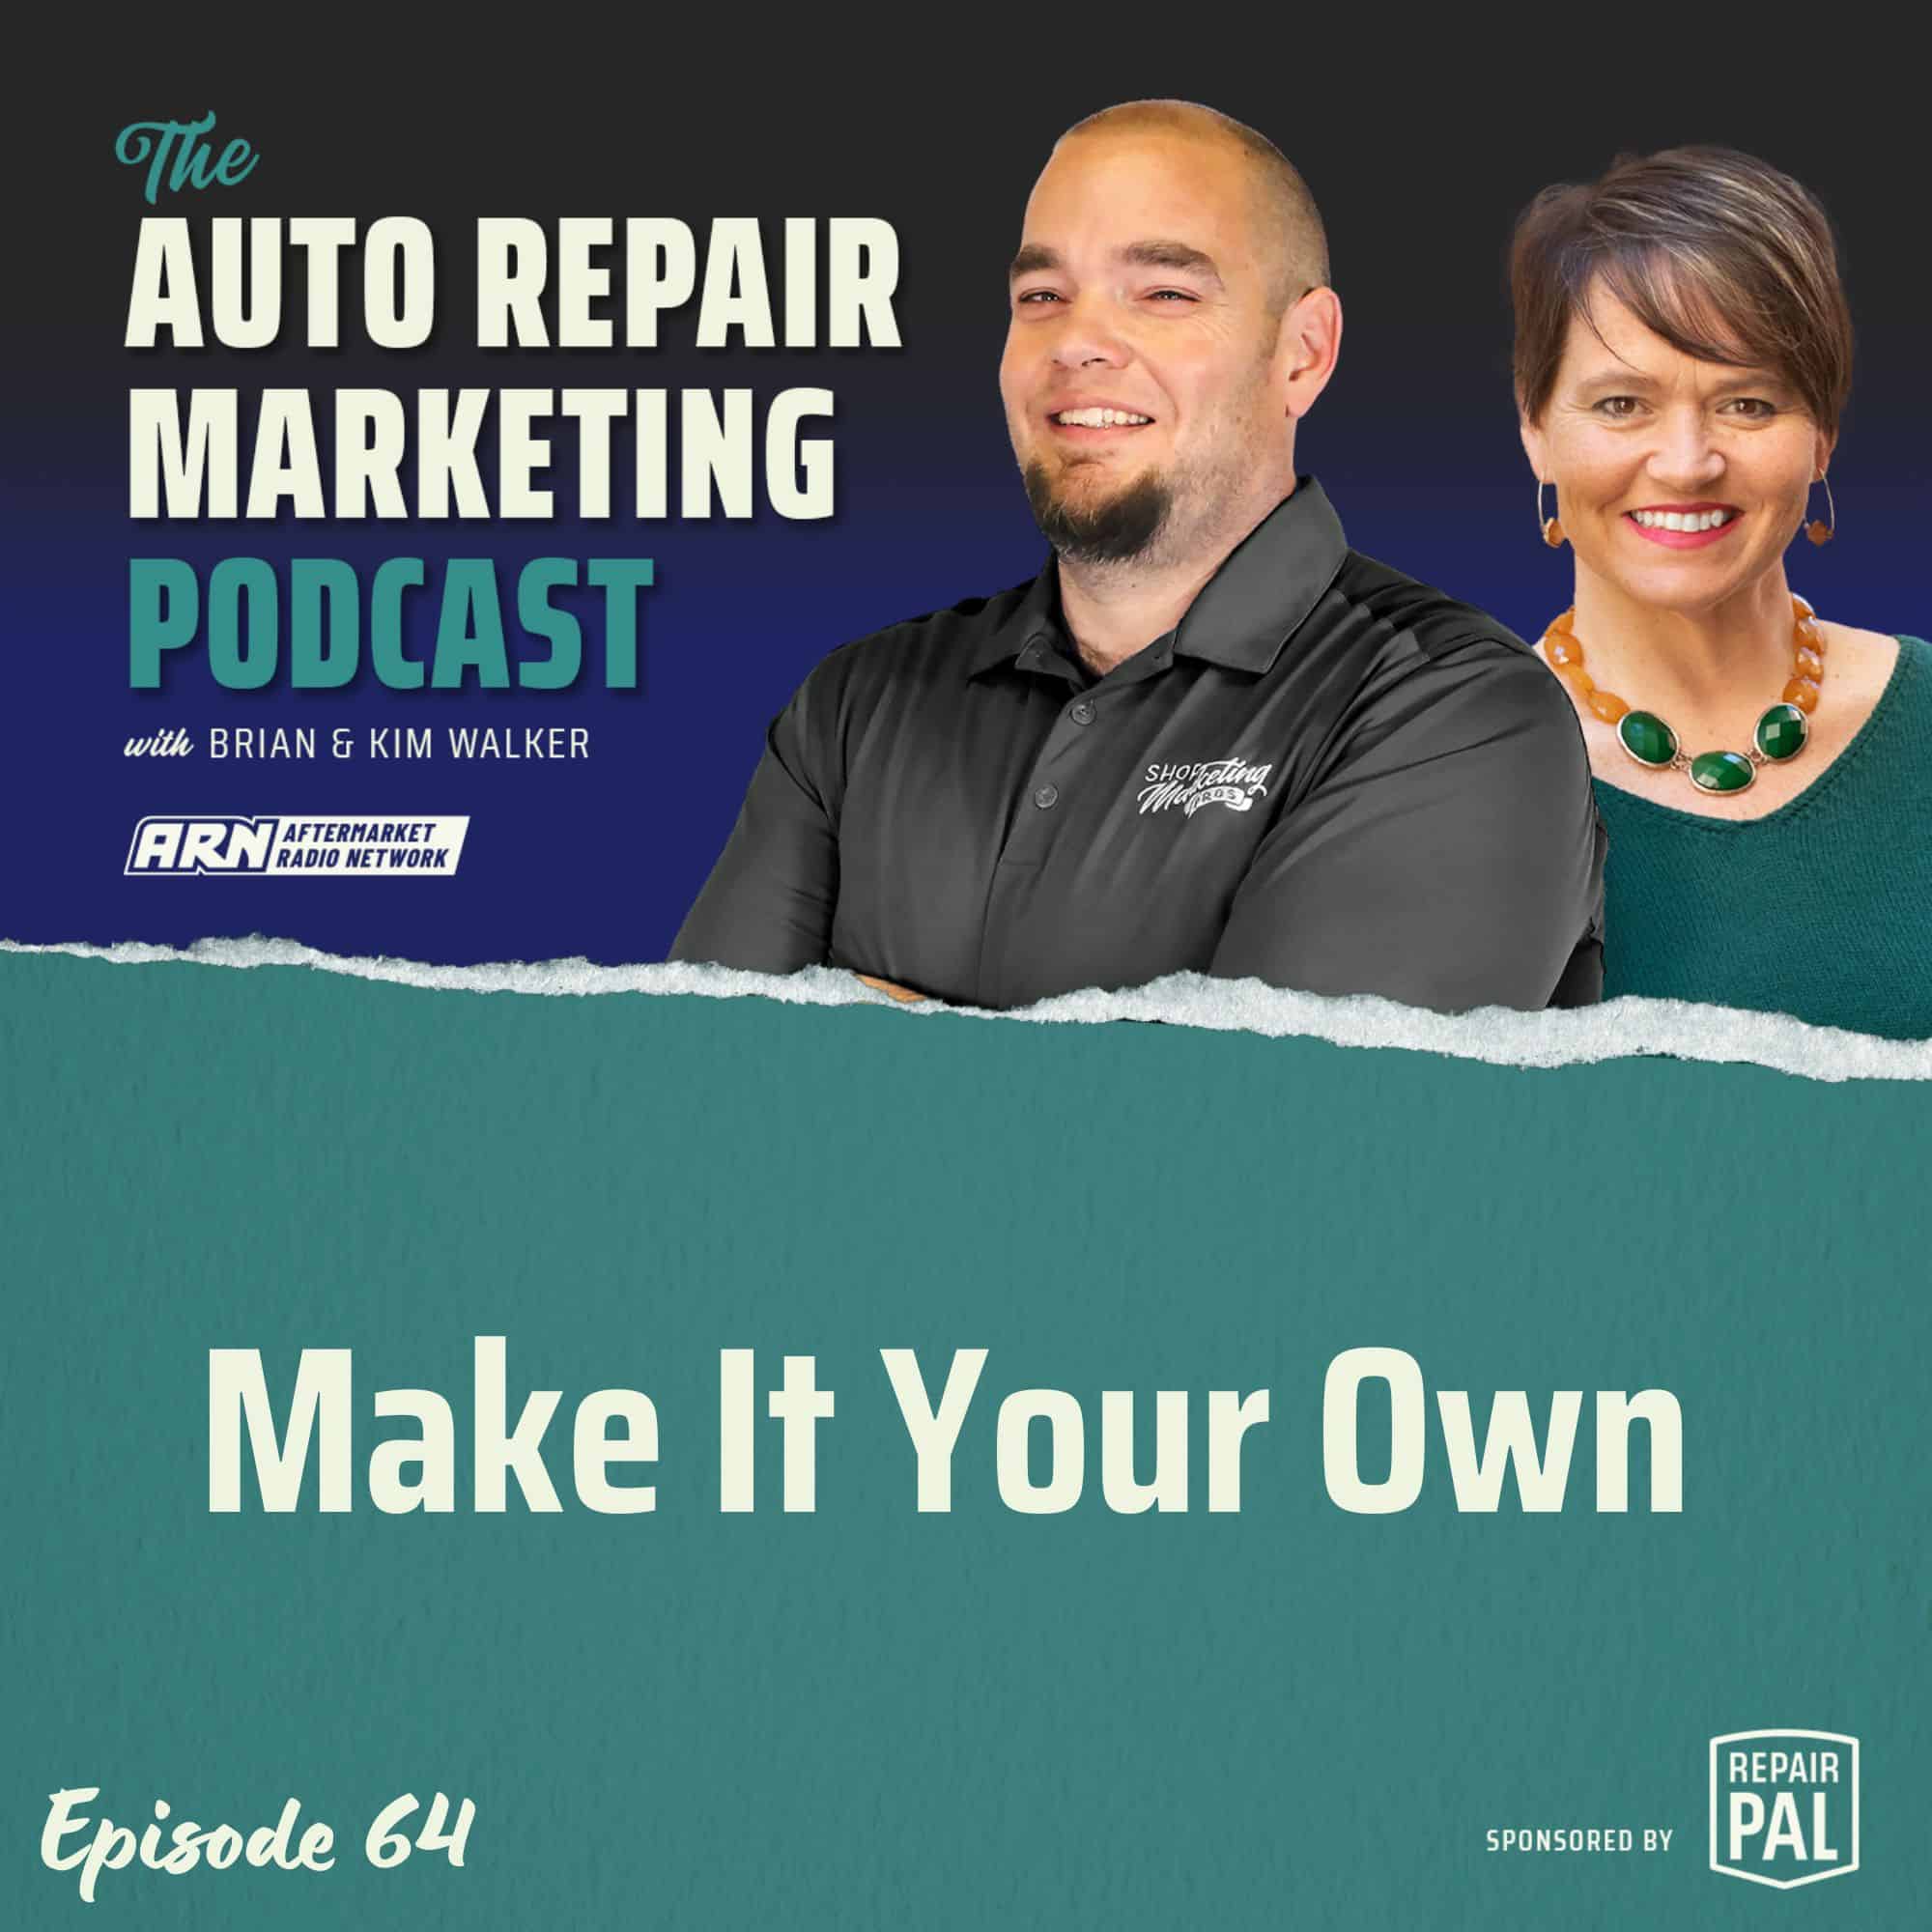 The Auto Repair Marketing Podcast with Brian and Kim Walker, Episode 64, titled "Make It Your Own." Brian and Kim Walker are smiling and standing side by side.